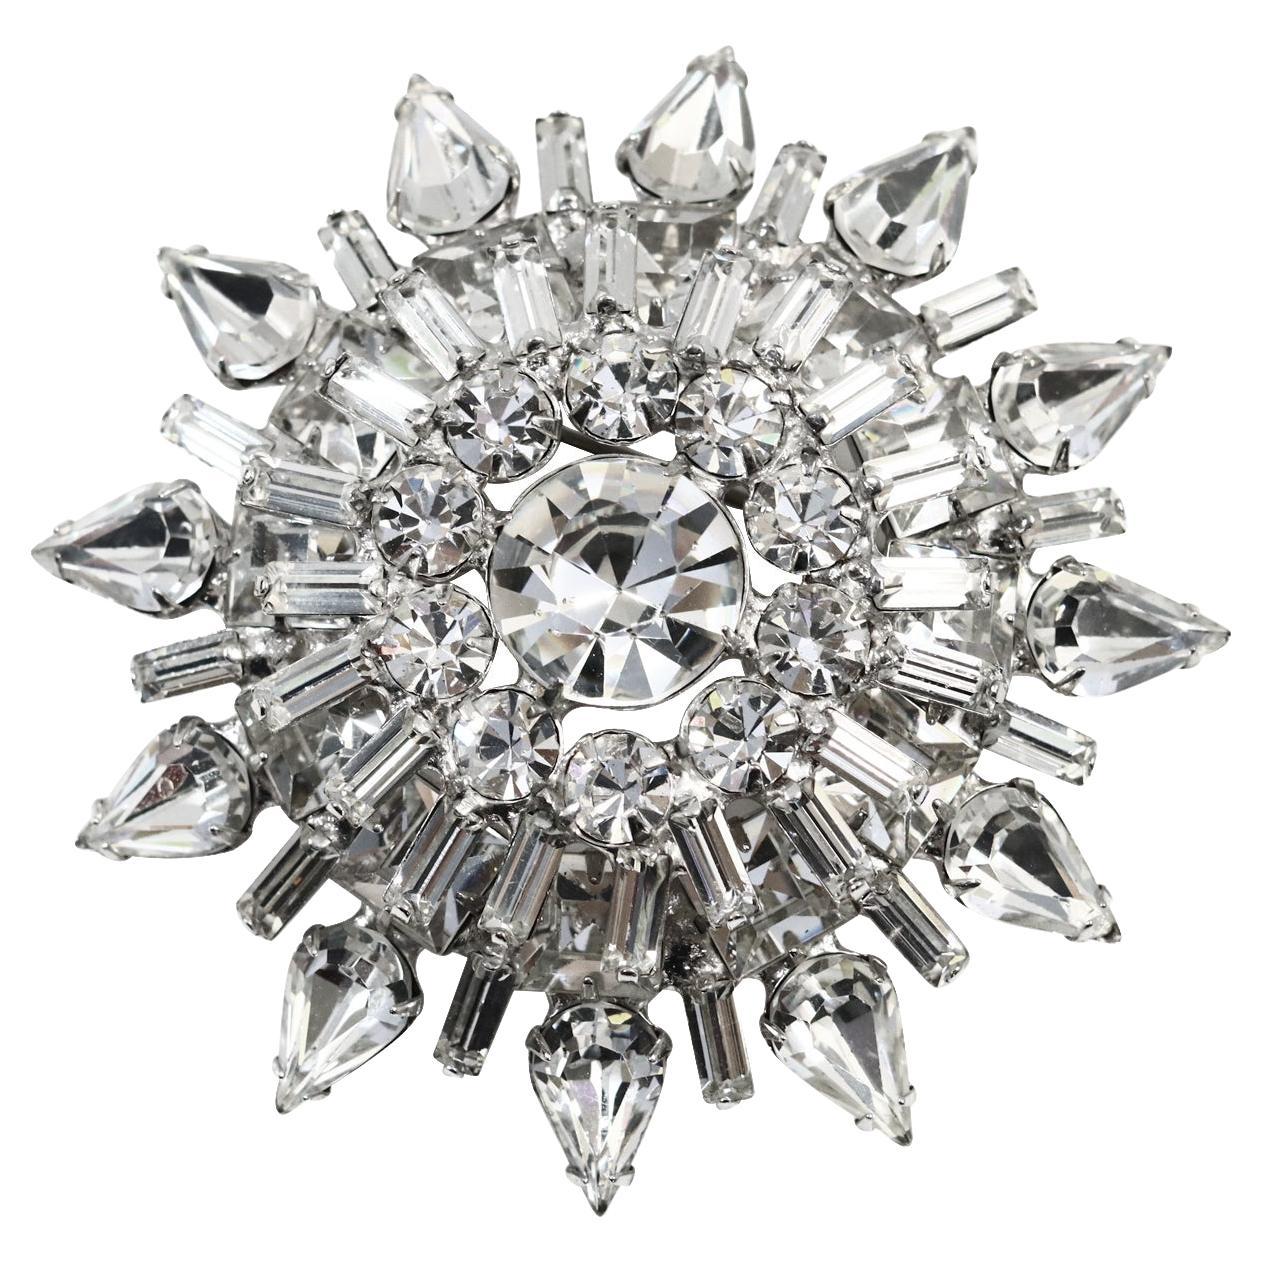 Vintage Diamante Double Layer Round Brooch Circa 1960s. The brooch is made of  pears, baguettes, and round diamante shapes all prong set. The end row is pear shapes that face outward in a spiky pattern.  So chic for the 1960s and so relevant for